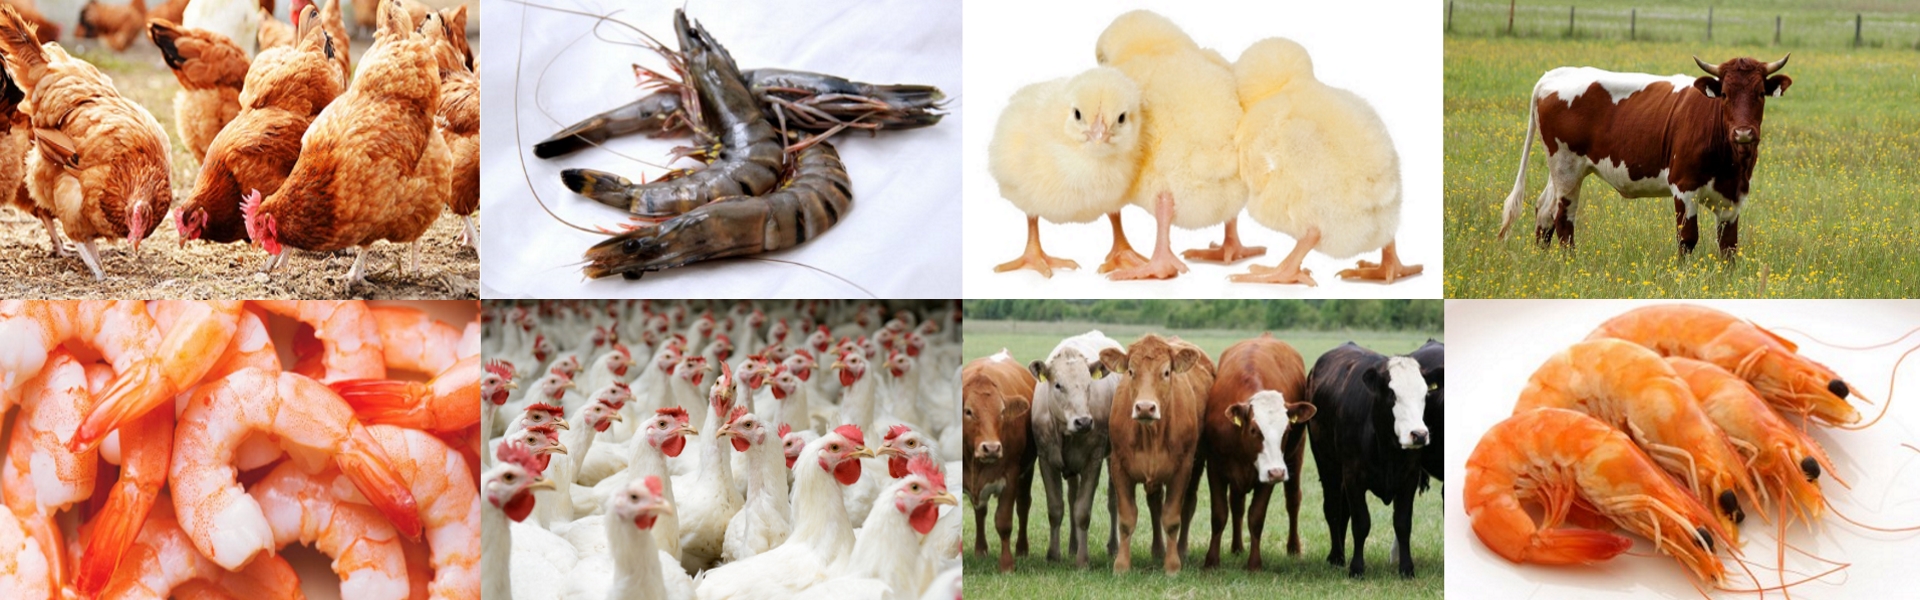 Soya Lecithin for Poultry, Aqua and Cattle Feed Manufacturing